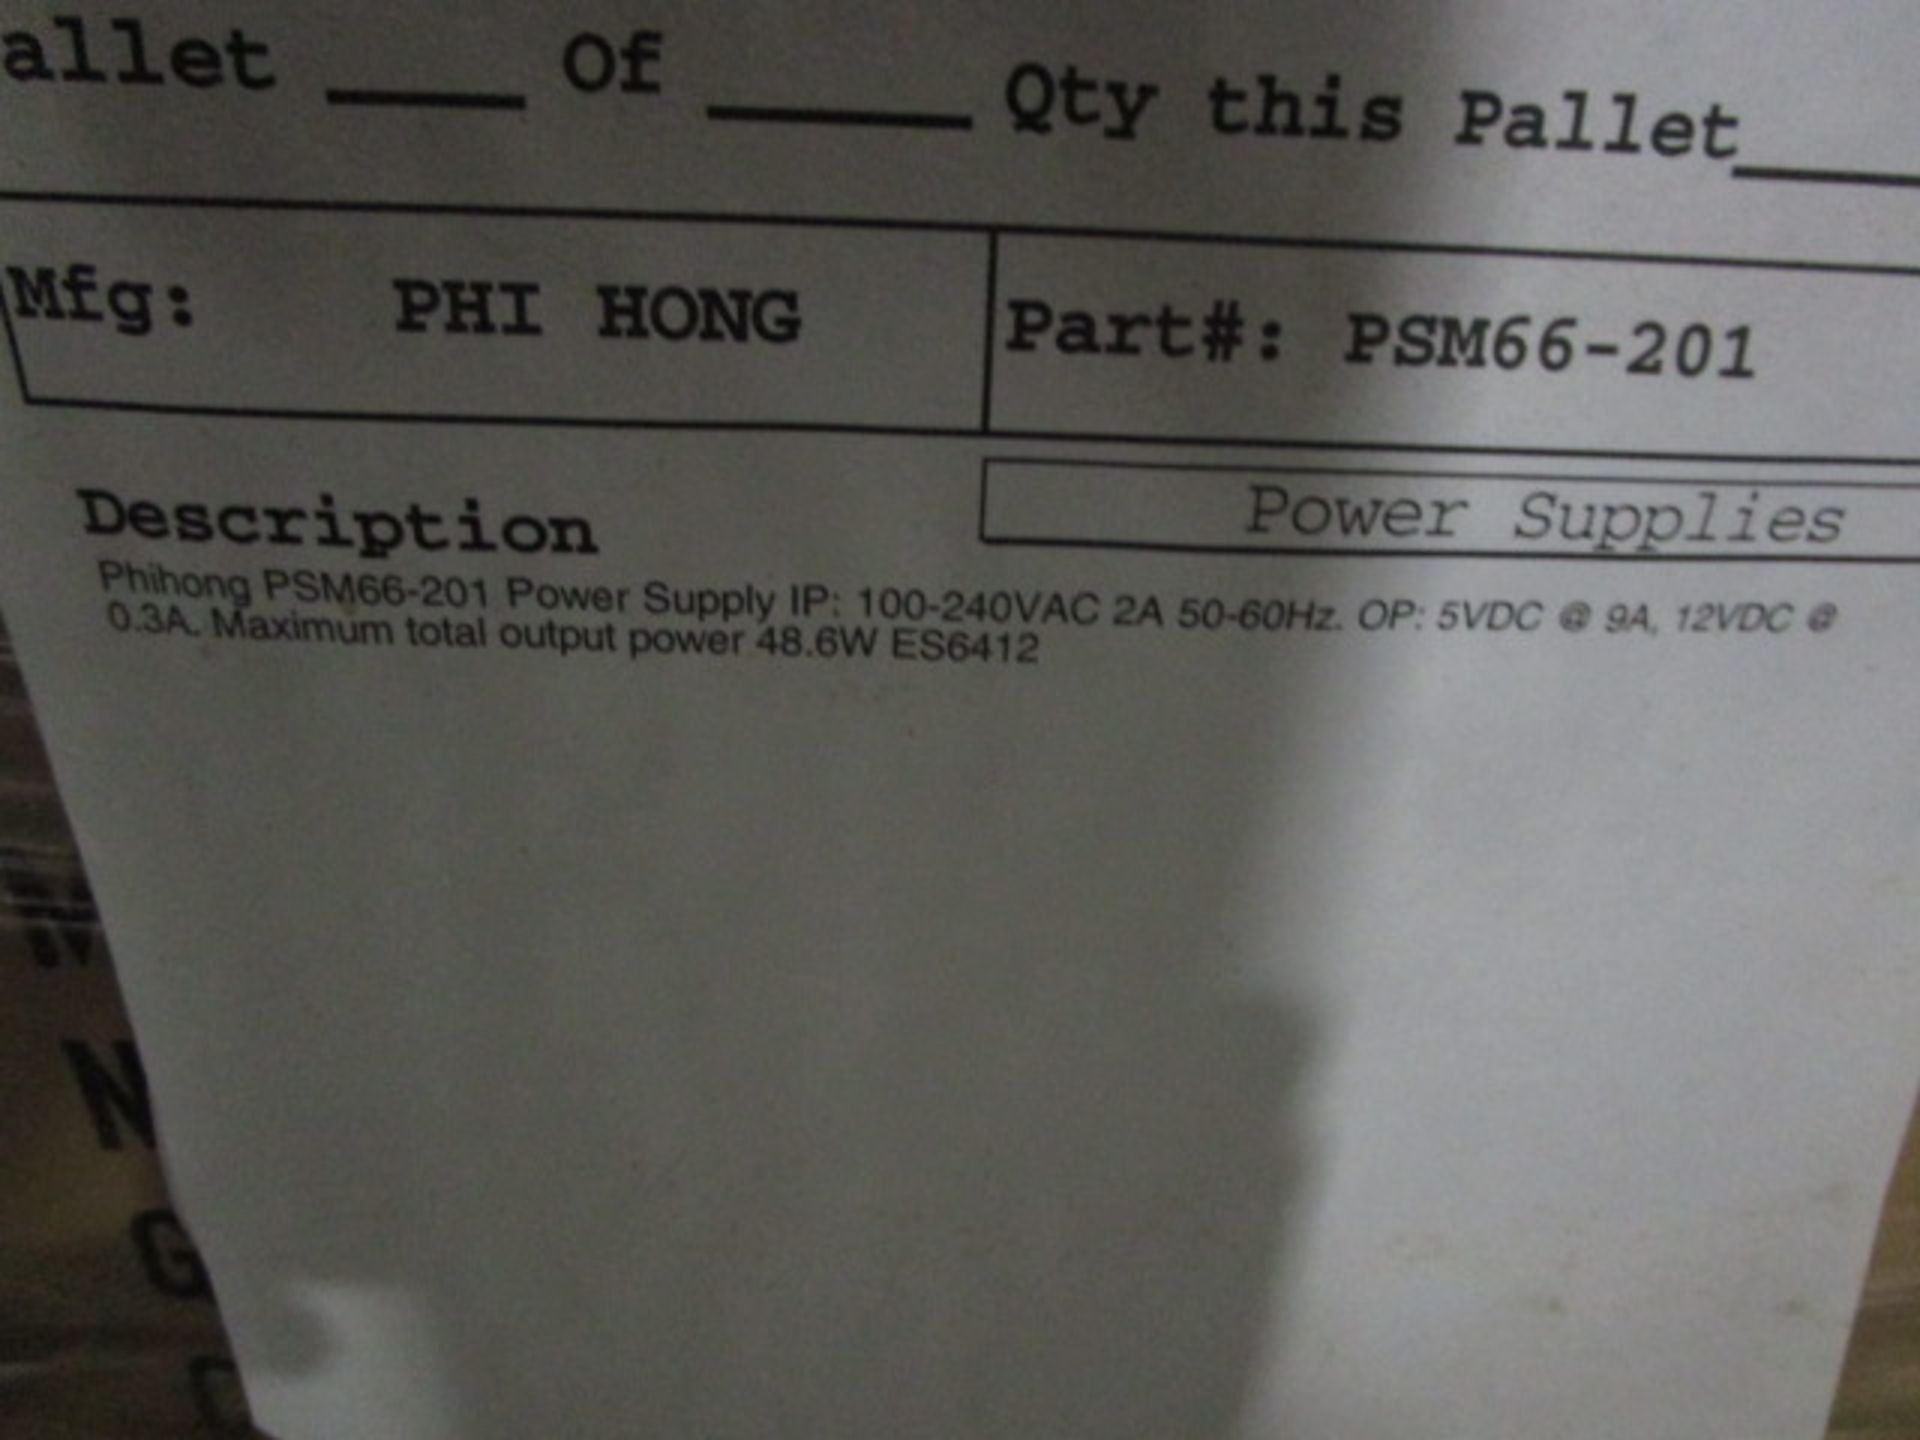 PALLET CONTAINING CONTENTS OF PHI HONG POWER SUPPLY - Image 3 of 3